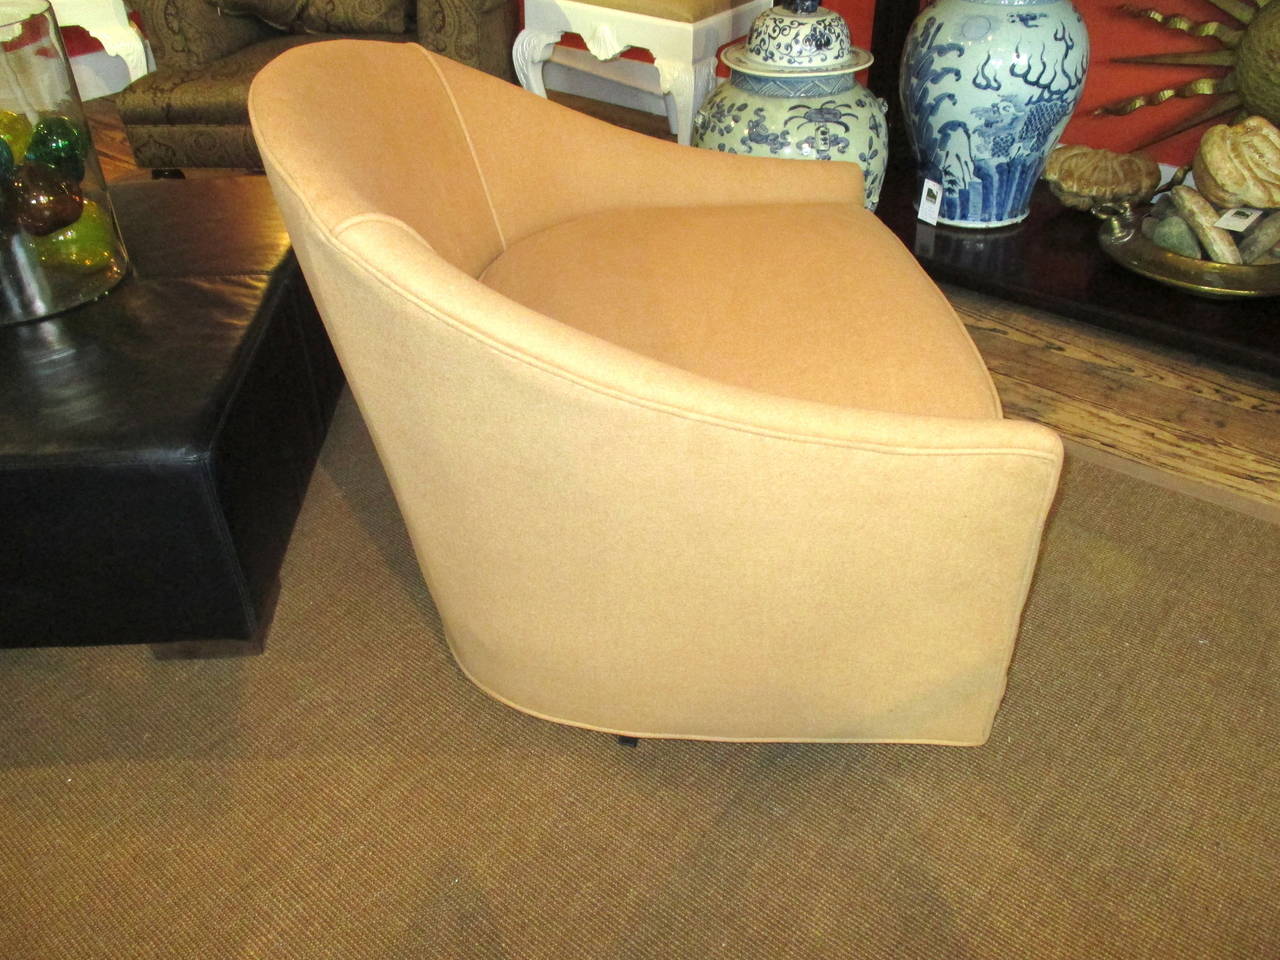 Pair of Milo Baughman style barrel back swivel chairs in Ralph Lauren camel fabric; fabric has been backed and scotch guarded.
Measures: Seat height 17.
Seat depth 22.5.